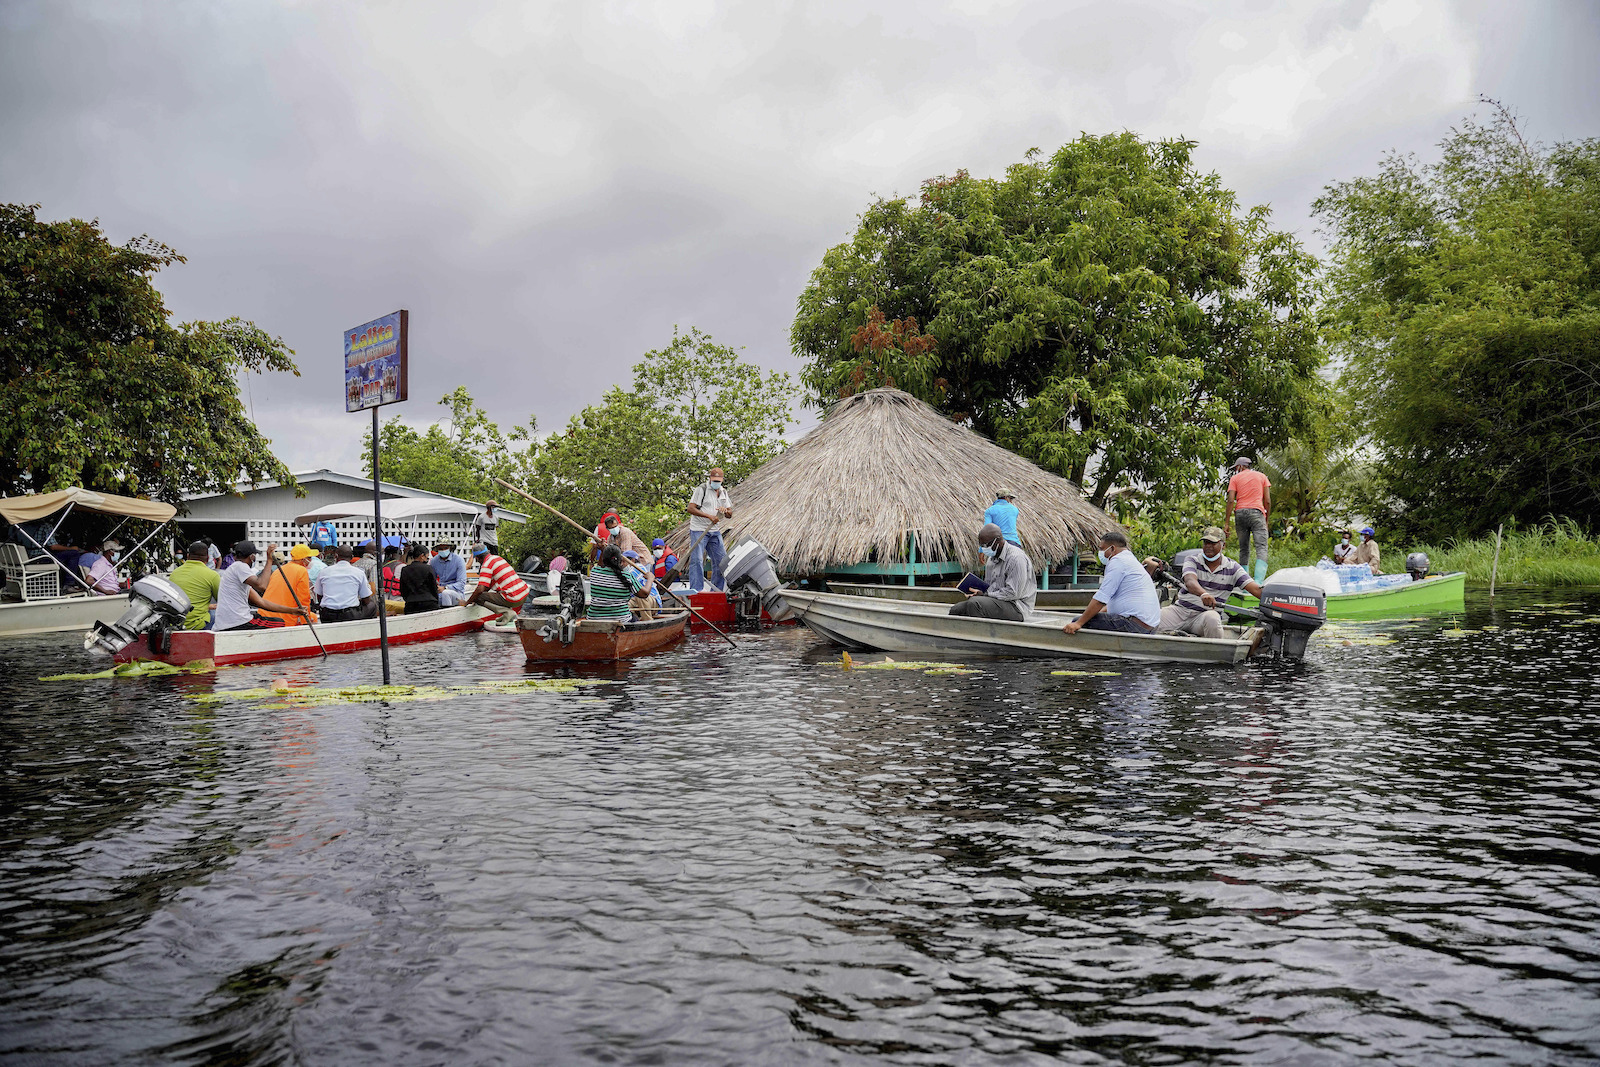 boats float on flood waters near a thatched hut